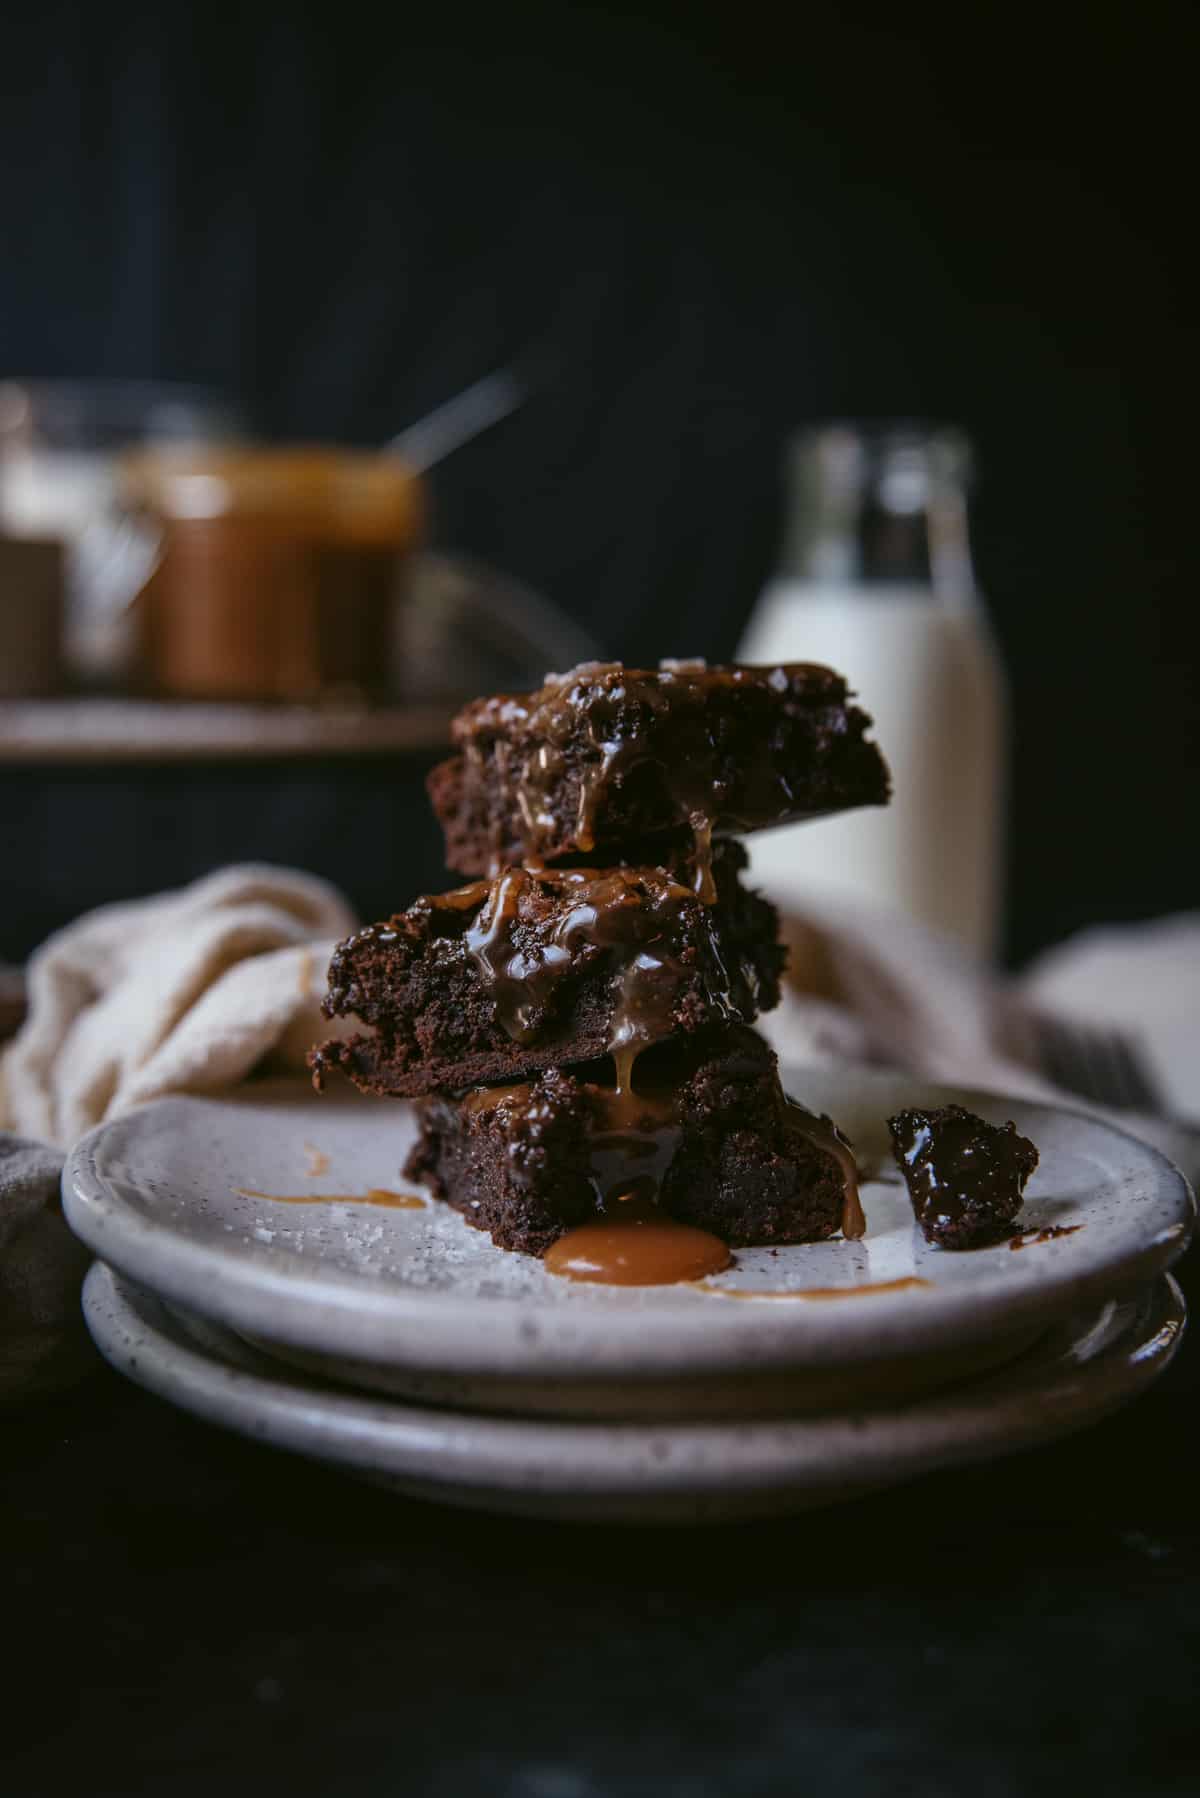 3 piece of salted caramel brownie are stacked on top of each other on  a white terrazzo plate. Caramel has ran over all the brownies and there is a small pool gathered on the plate. A piece of brownie has broken of one of the pieces and sit on the plate. There is a bottle of milk in the background along with a jar of the caramel sauce.